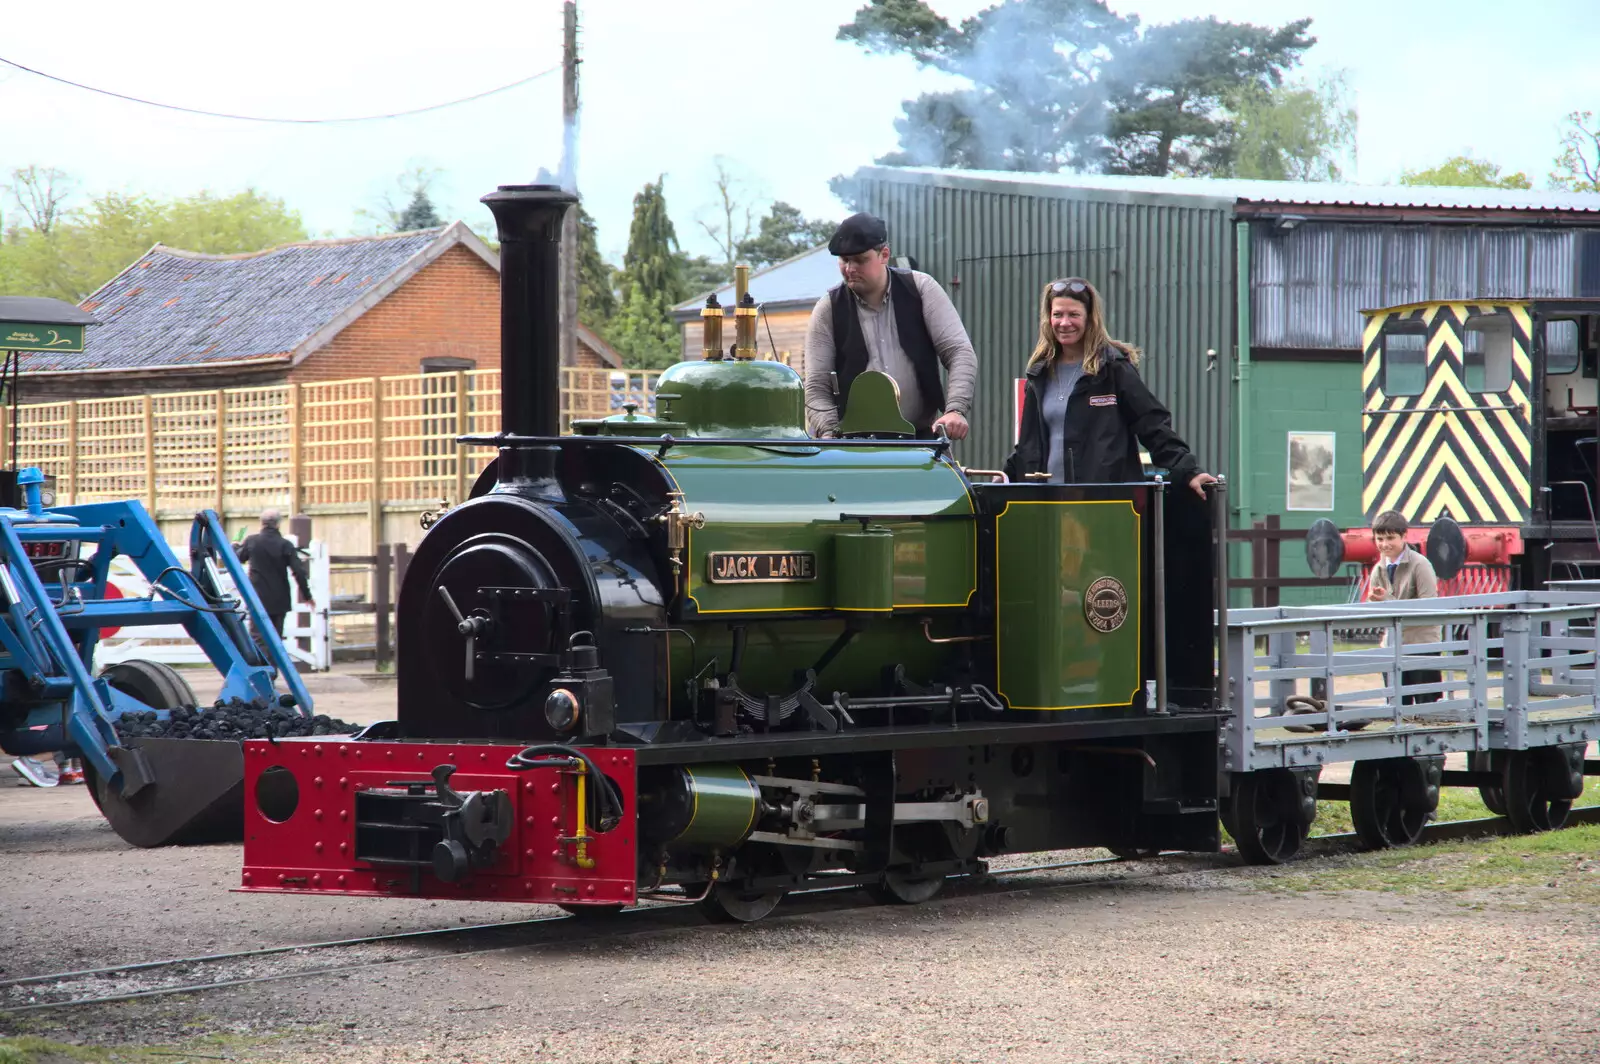 The shiny Jack Lane, built in 2006, from The Heritage Steam Gala, Bressingham Steam Museum, Norfolk - 1st May 2023